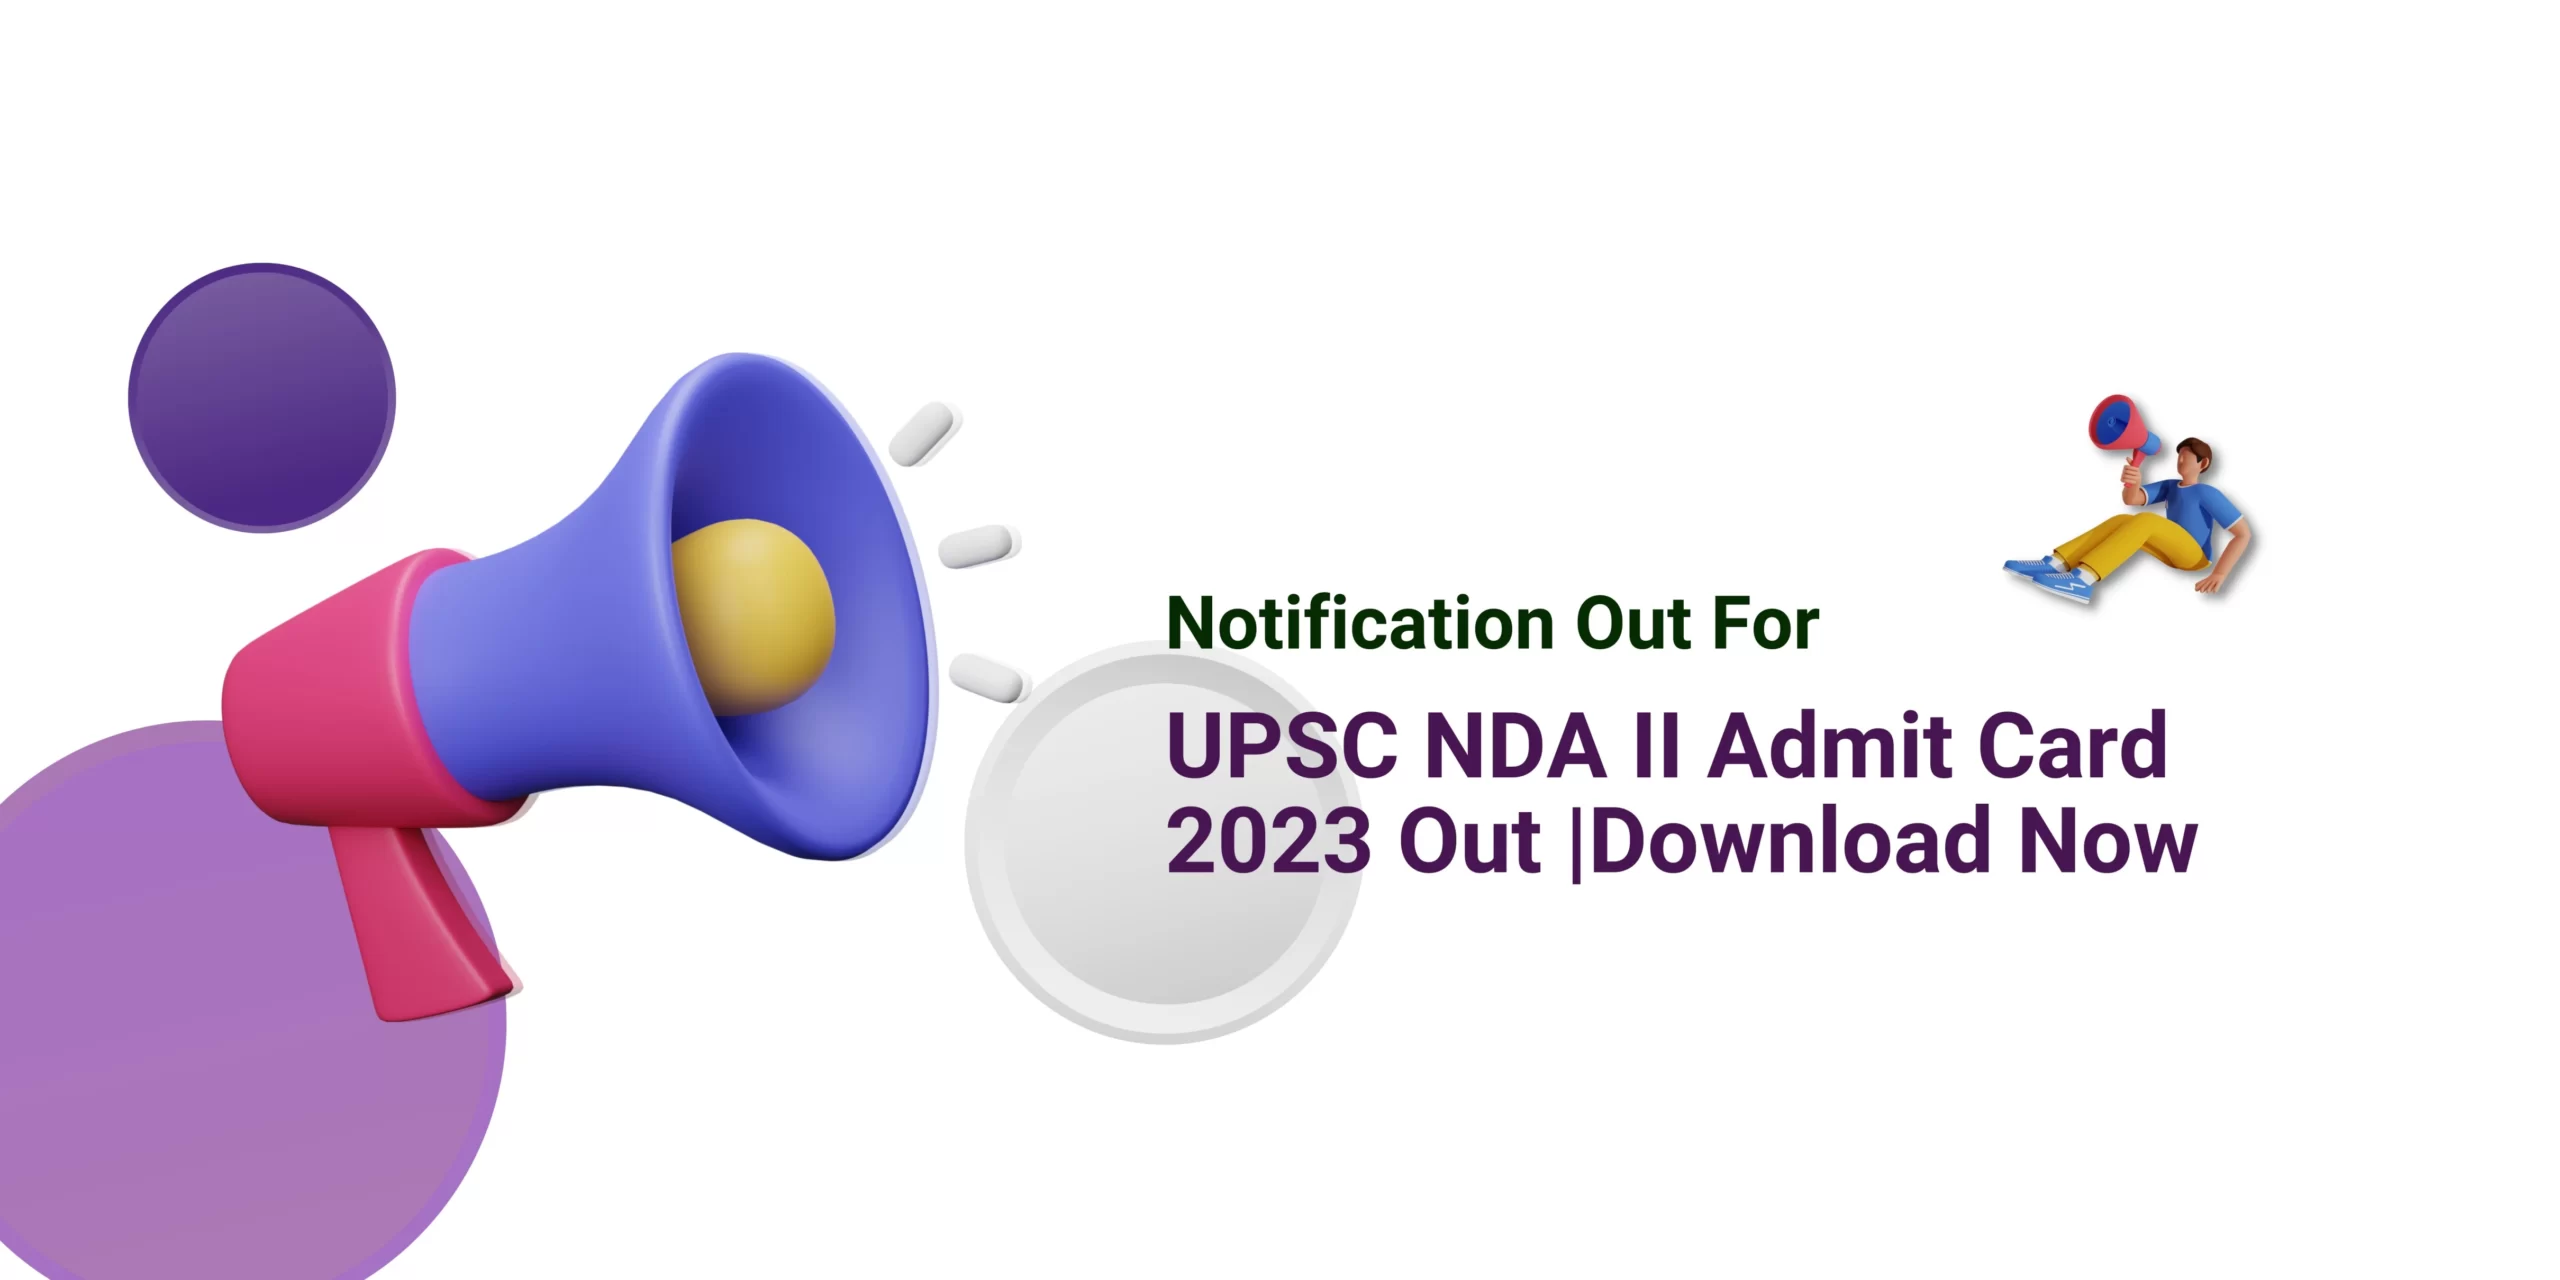 UPSC NDA II Admit Card 2023 Out |Download Now